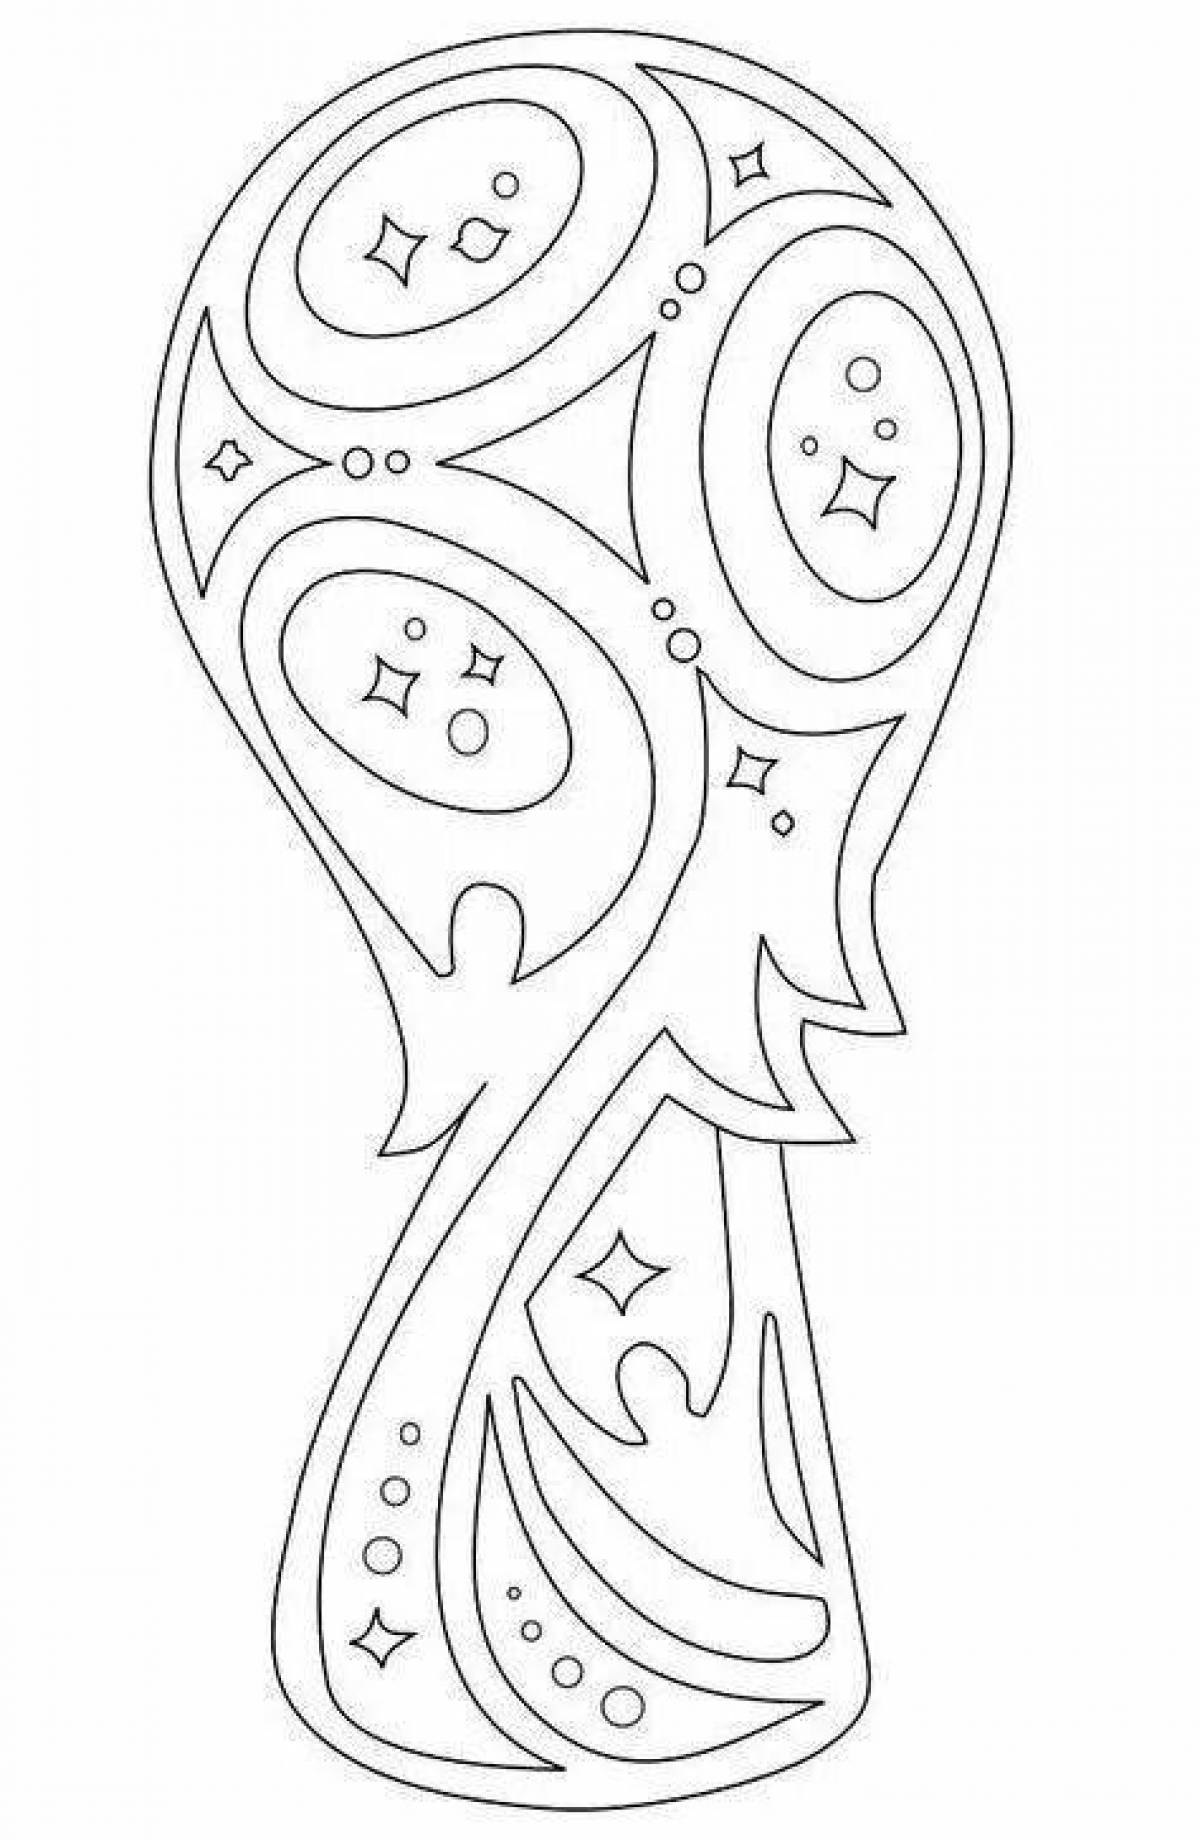 Colorful football world cup coloring page